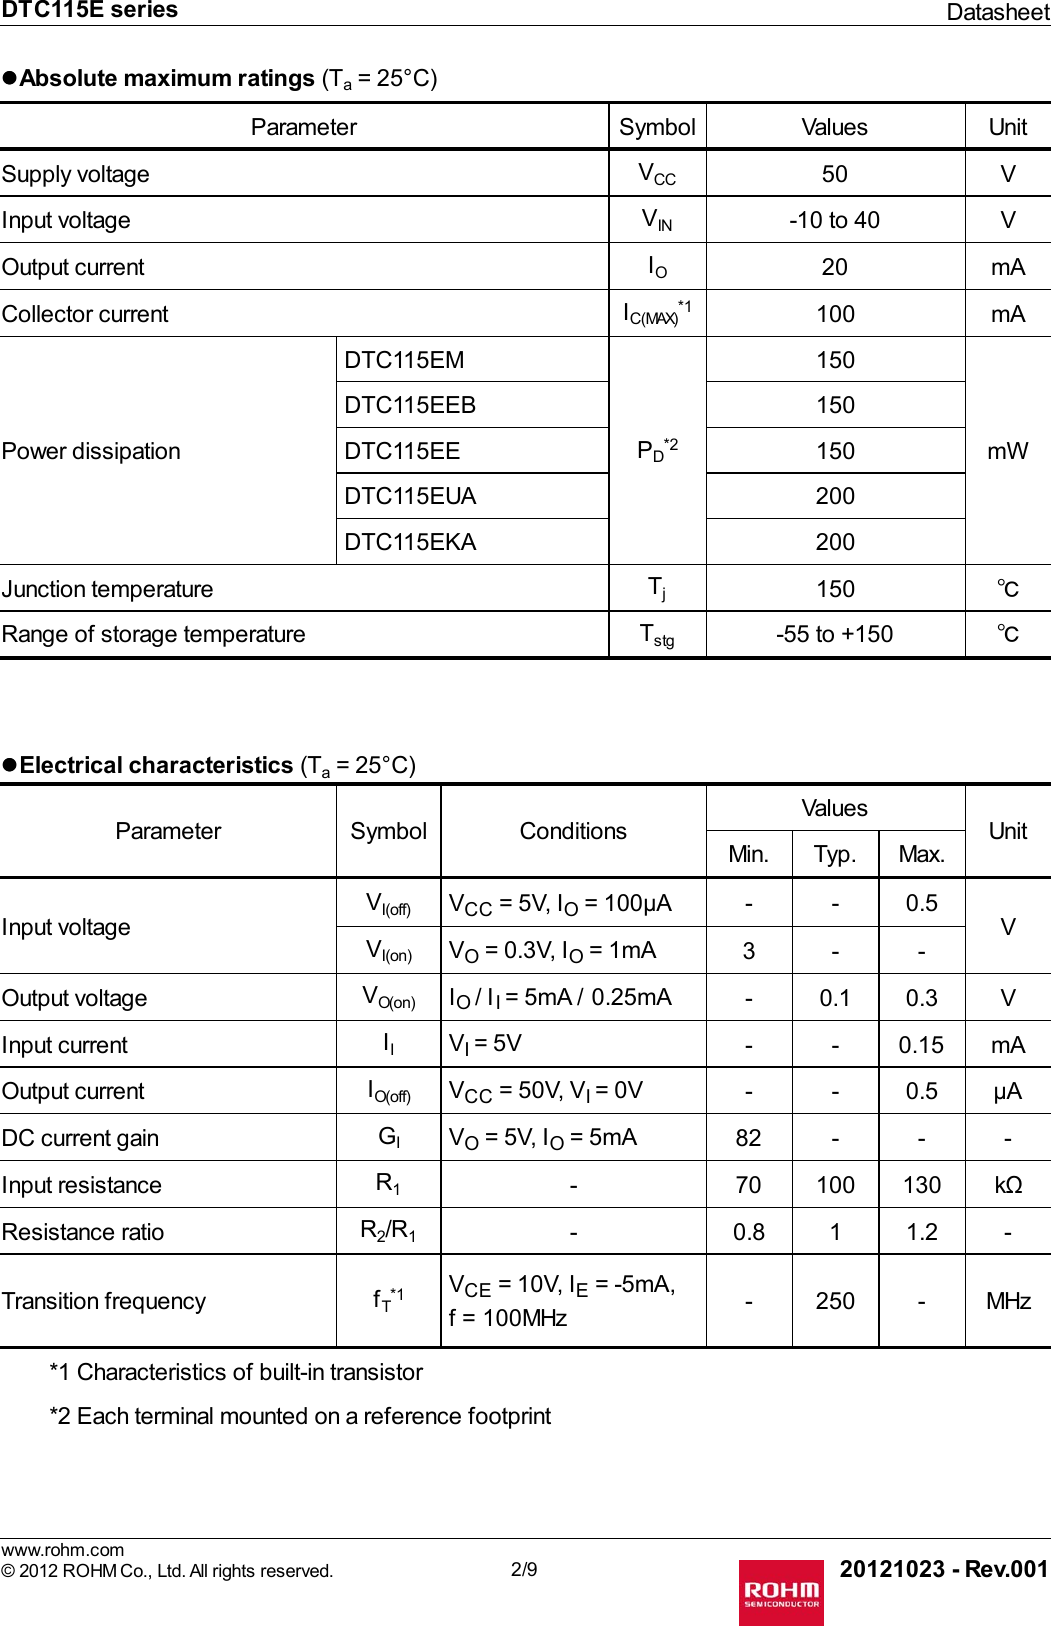 Page 2 of 11 - DTC115E Series - Datasheet. Www.s-manuals.com. Rohm